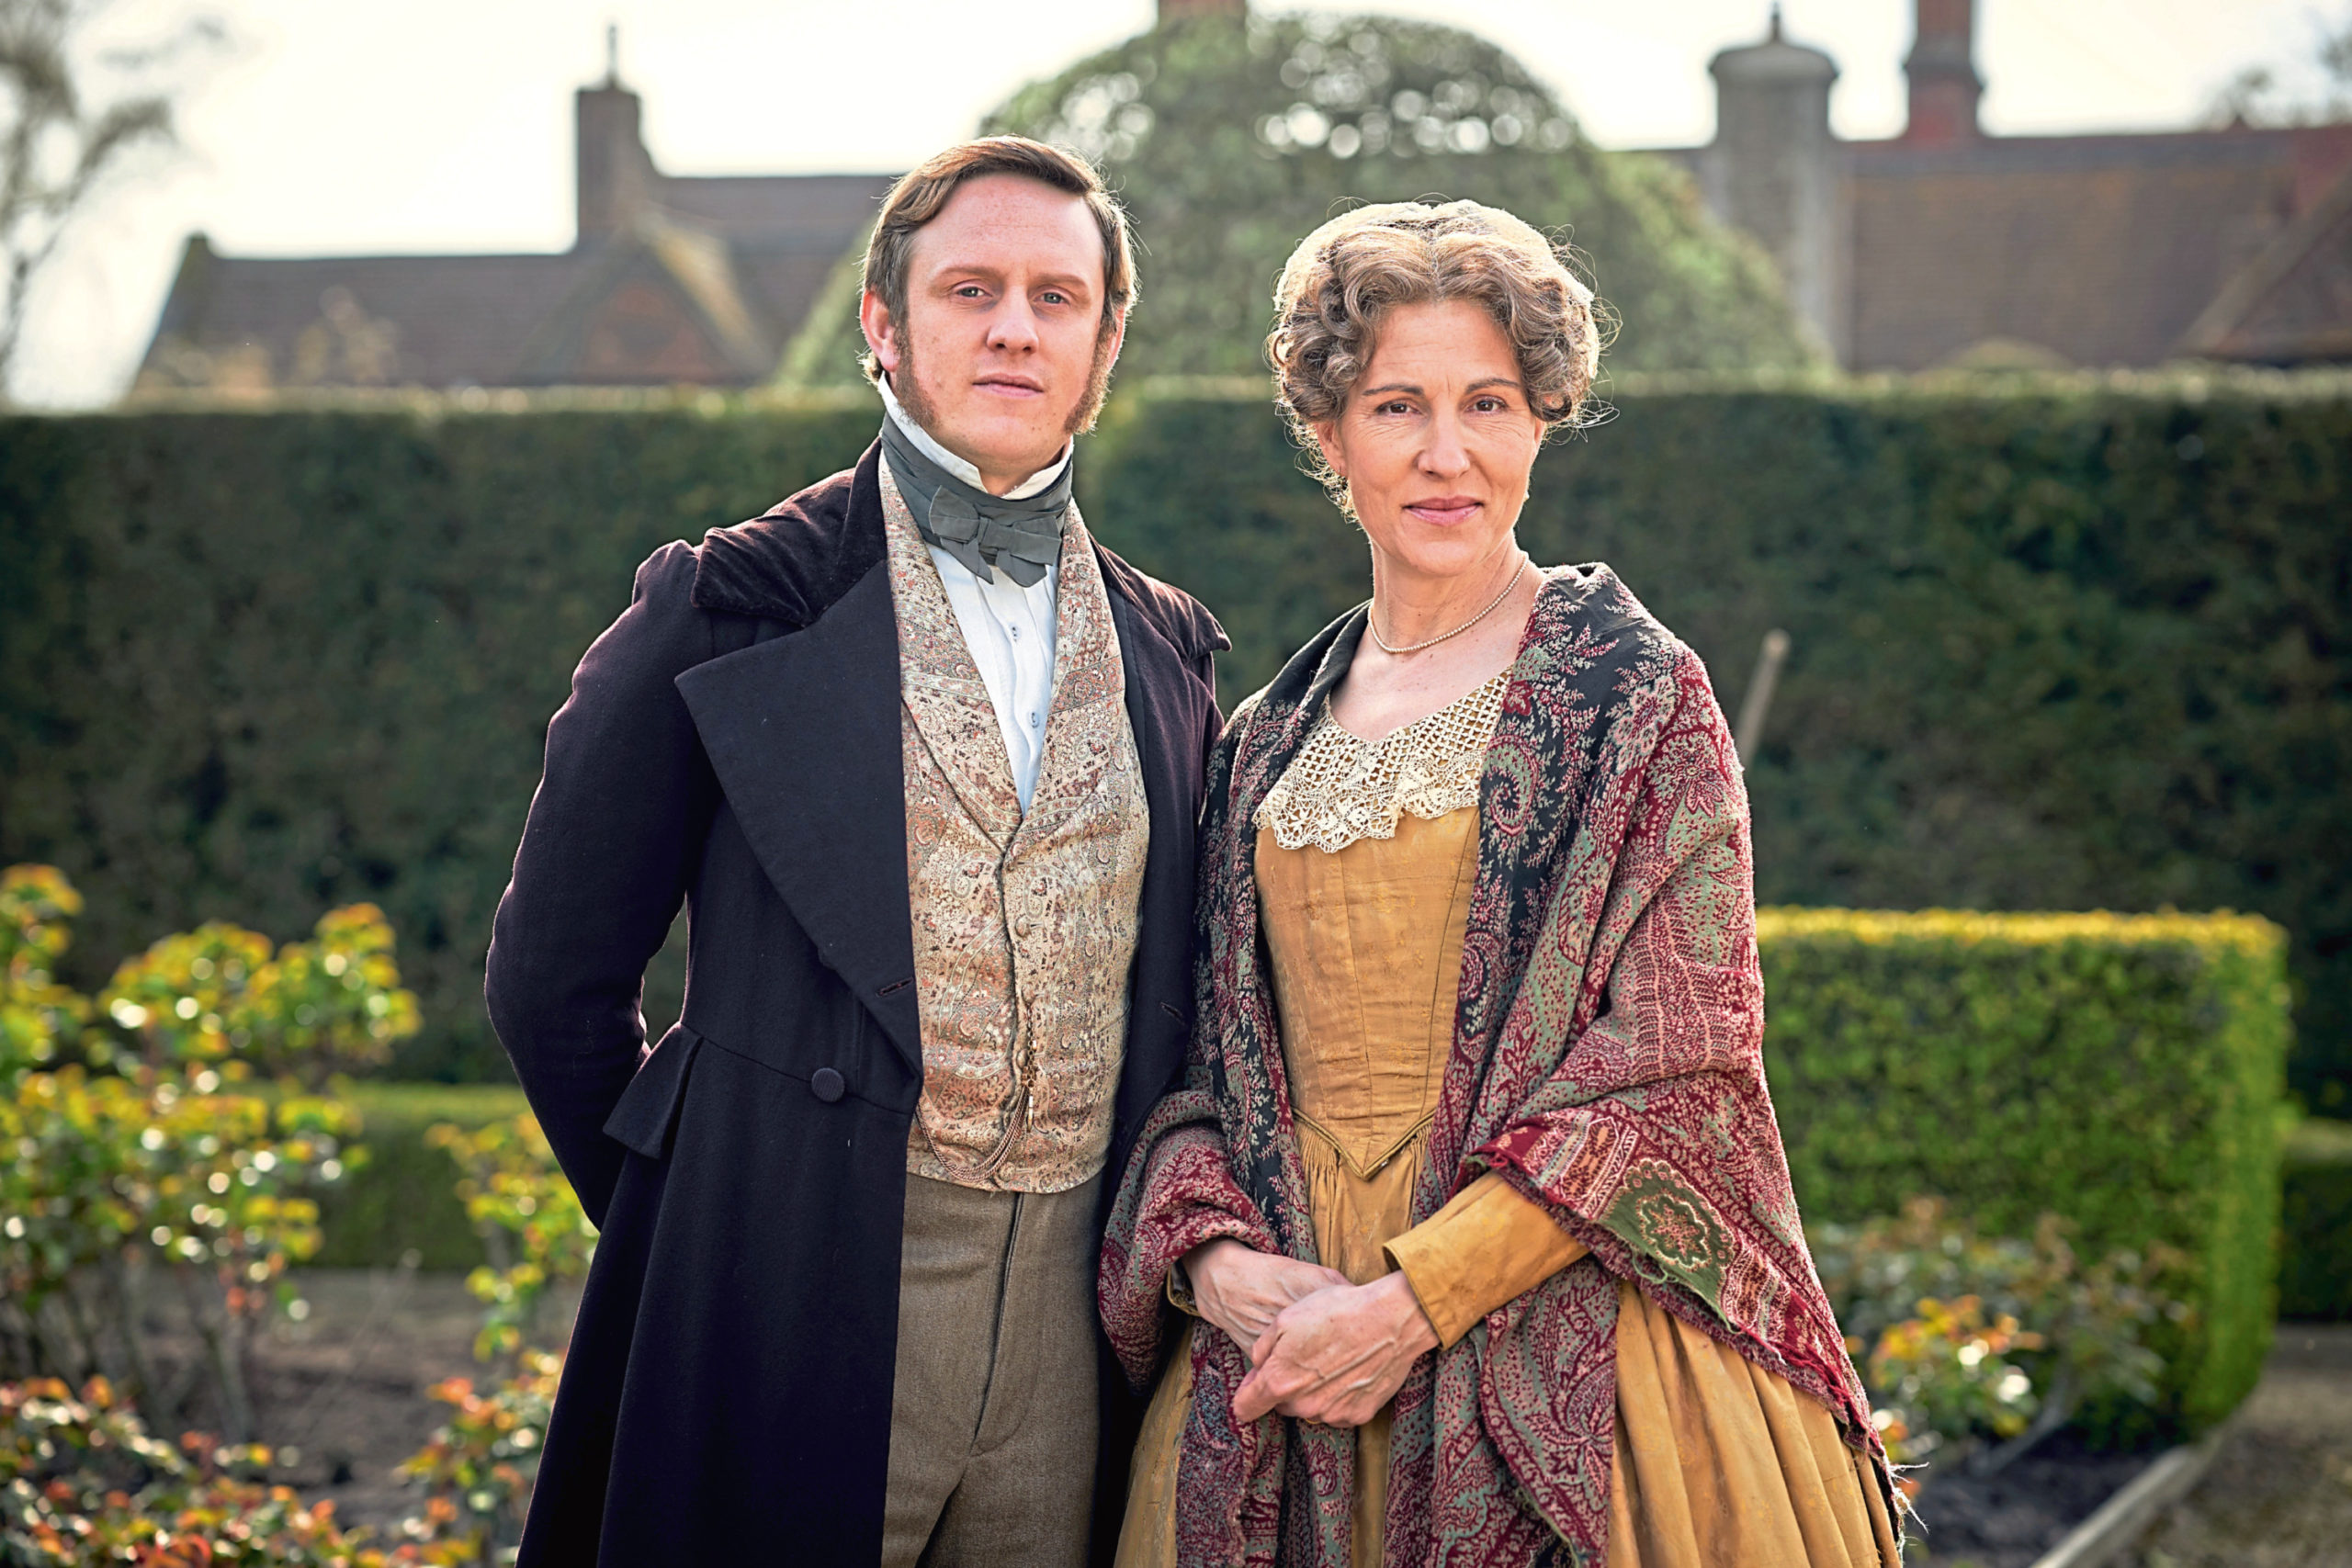 Costume drama Belgravia stars Tamsin Greig and Oliver Goulding